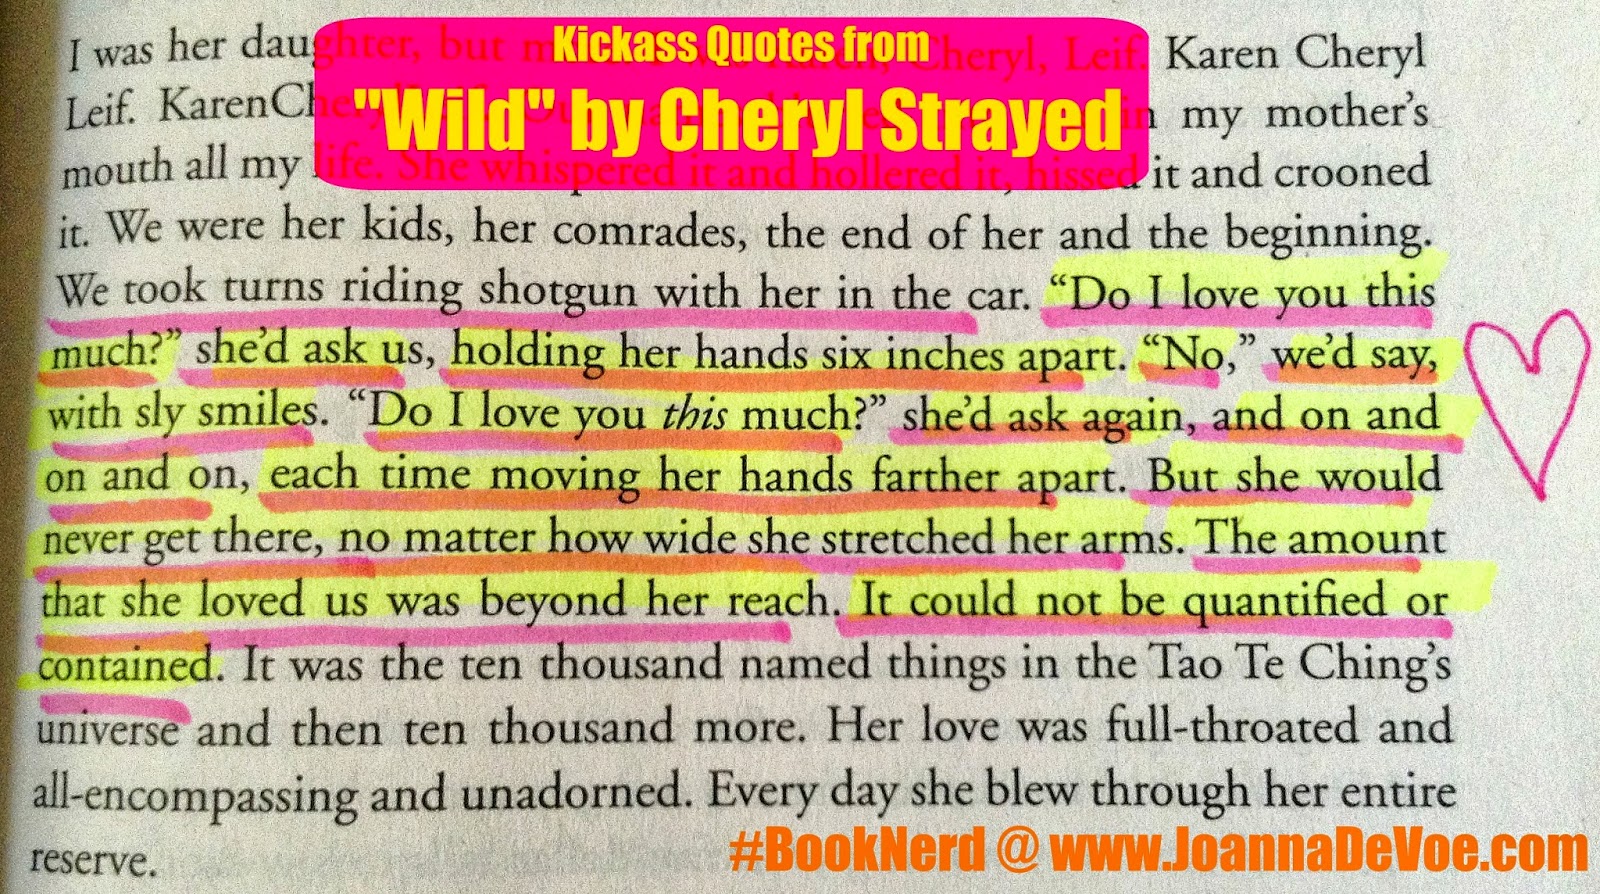 KiCKASS WiTCH Putting The "K" In Magick BOOK NERD Kickass Quotes from Wild by Cheryl Strayed